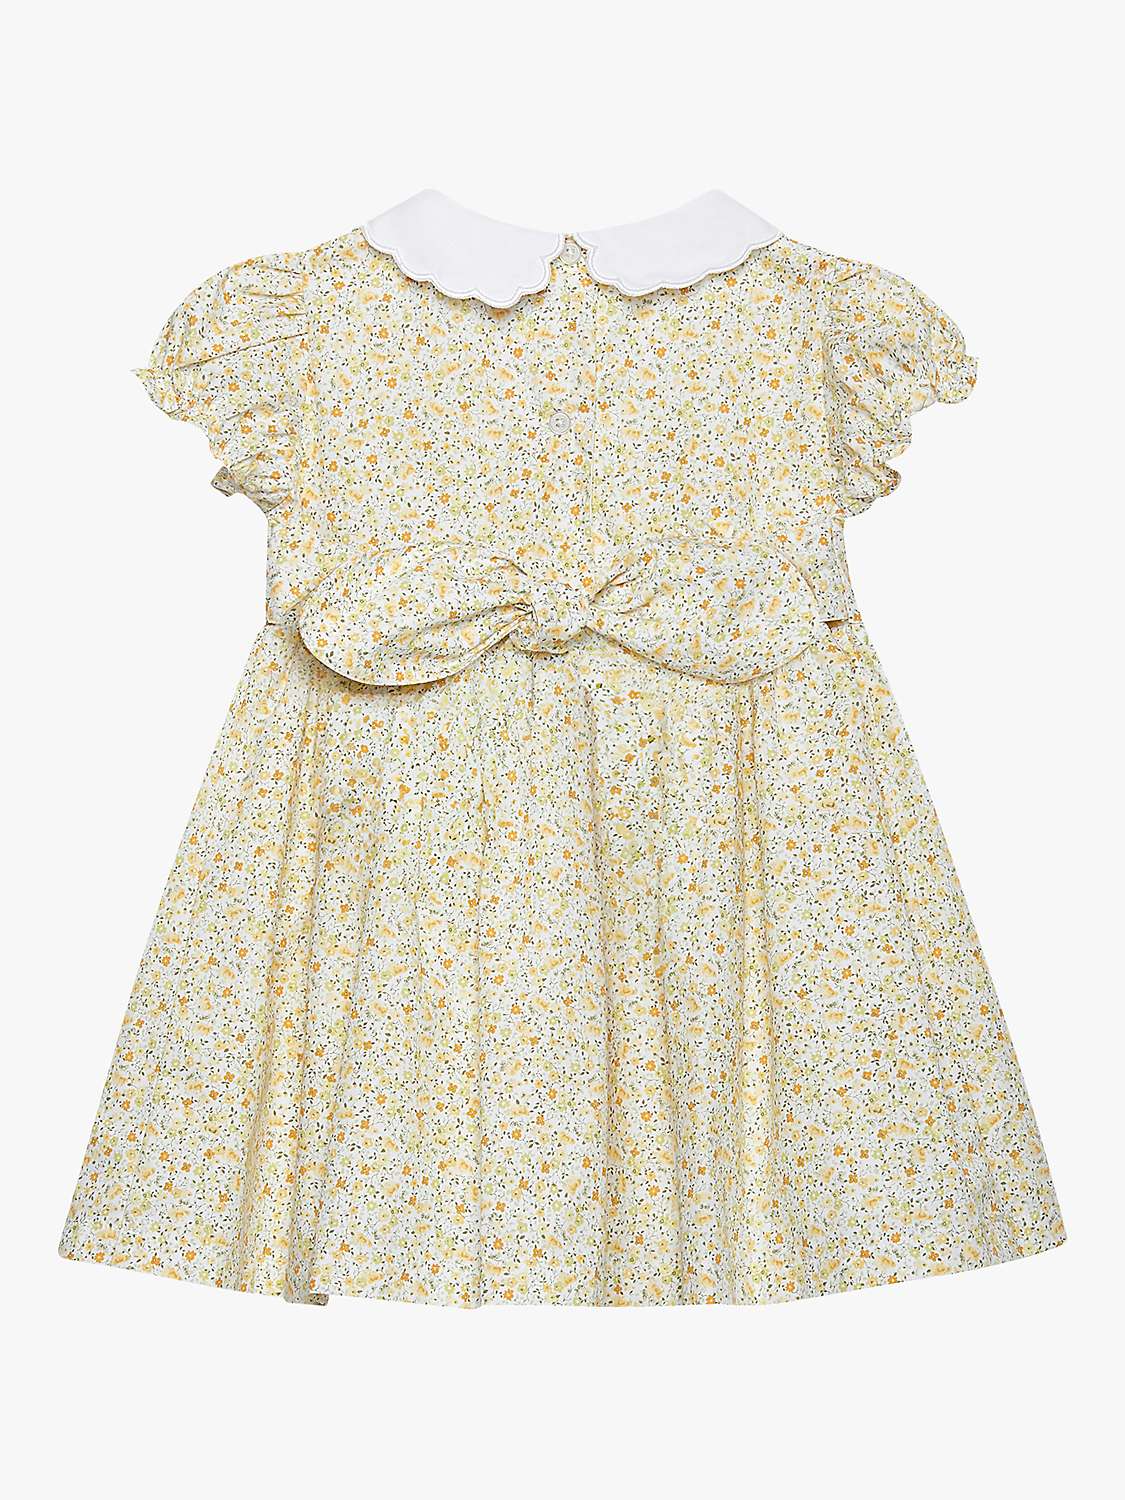 Buy Trotters Baby Floral Petal Collar Duck Dress, Yellow/Multi Online at johnlewis.com